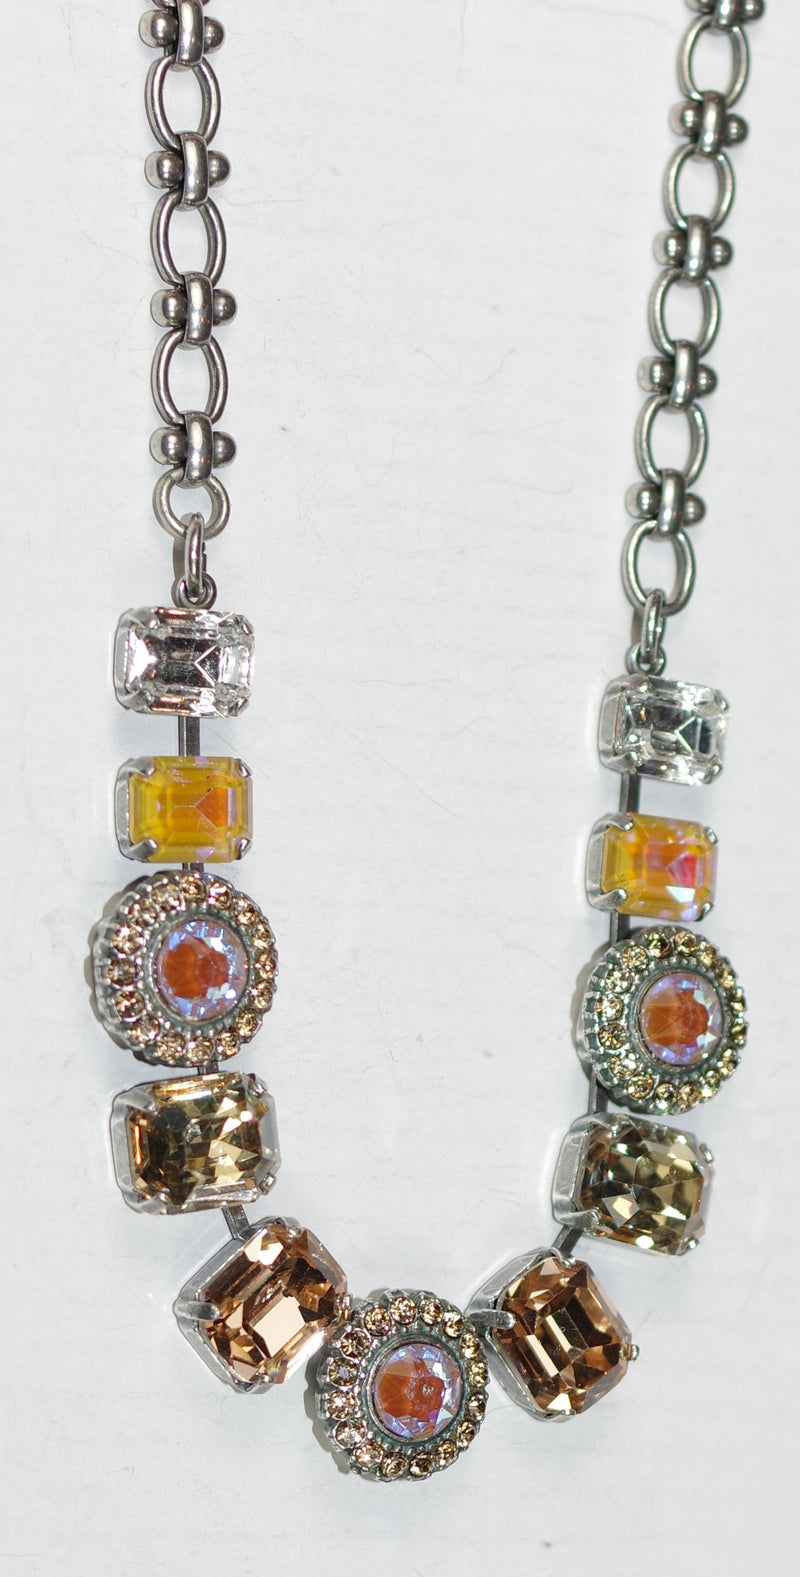 MARIANA NECKLACE BUTTER PECAN: amber, pink, clear stones in silver setting, 21" adjustable chain